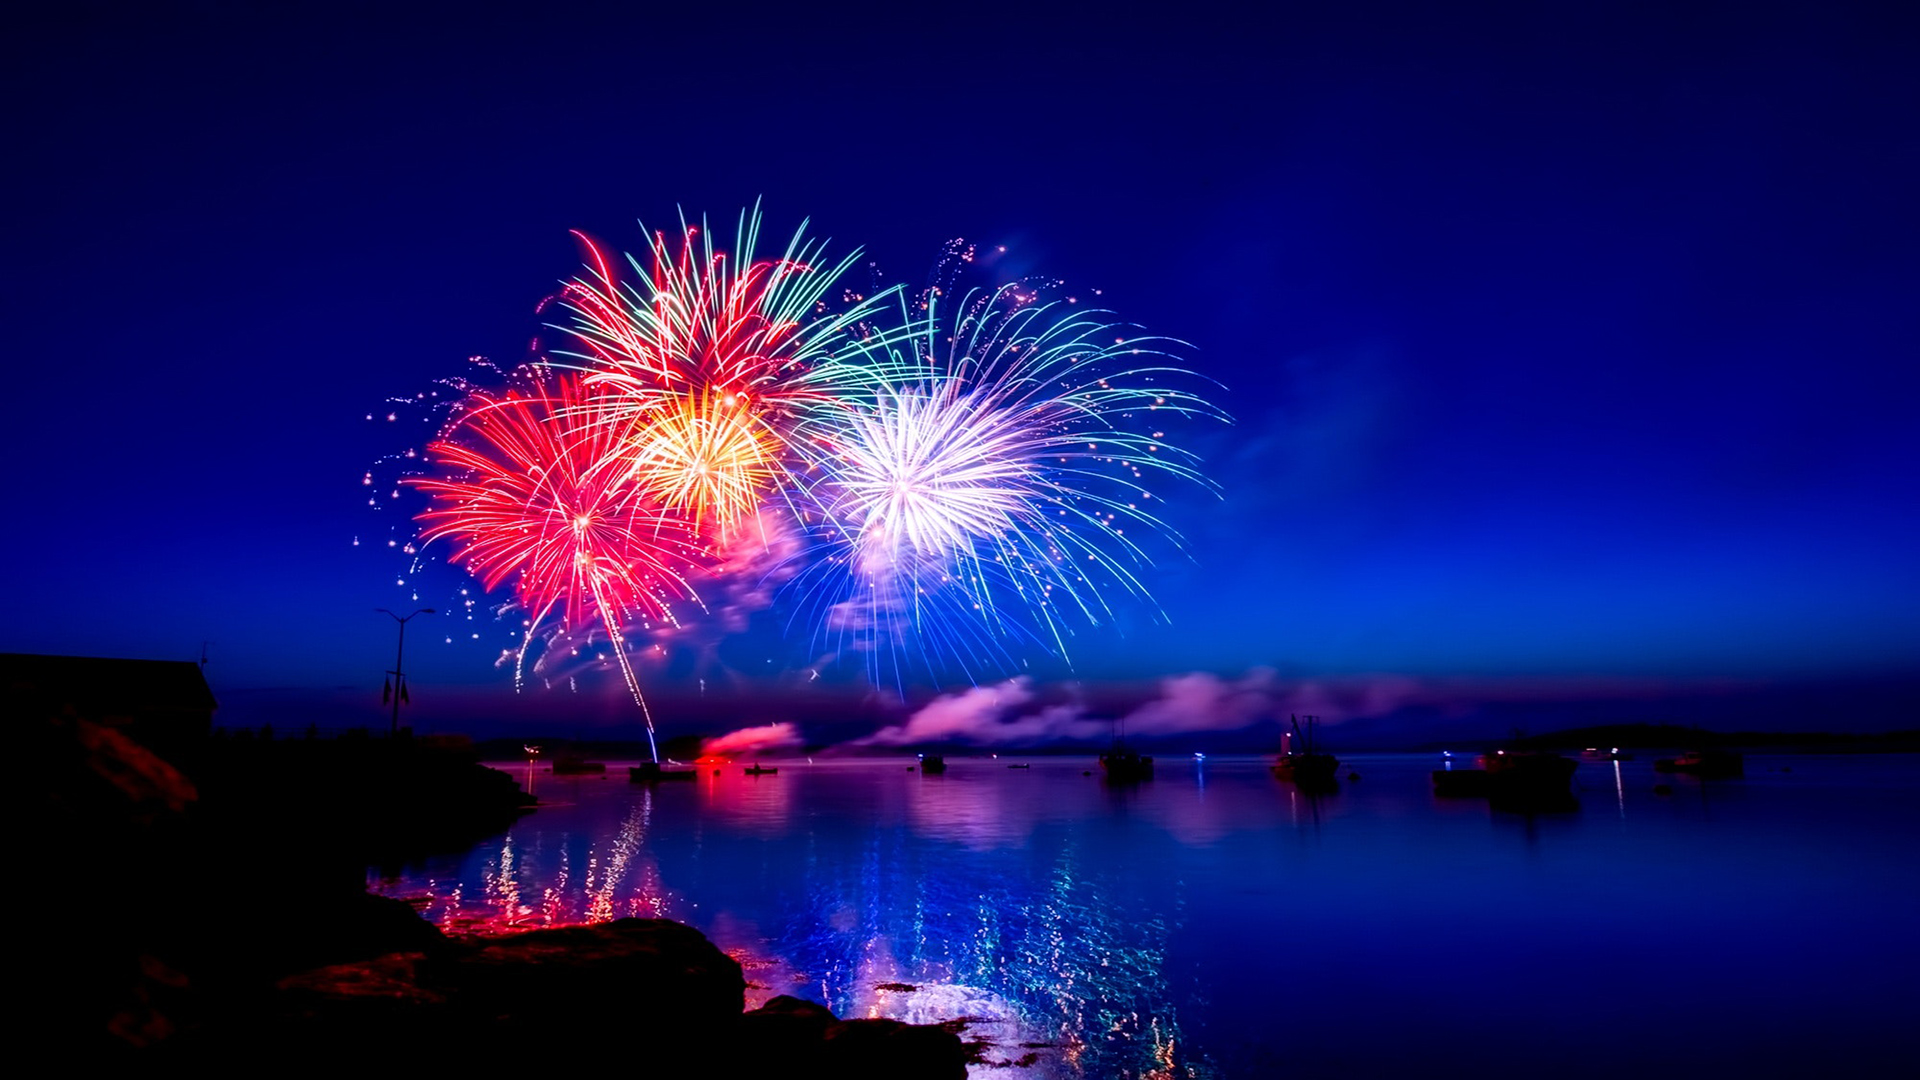 micromax live wallpaper,fireworks,nature,reflection,sky,night